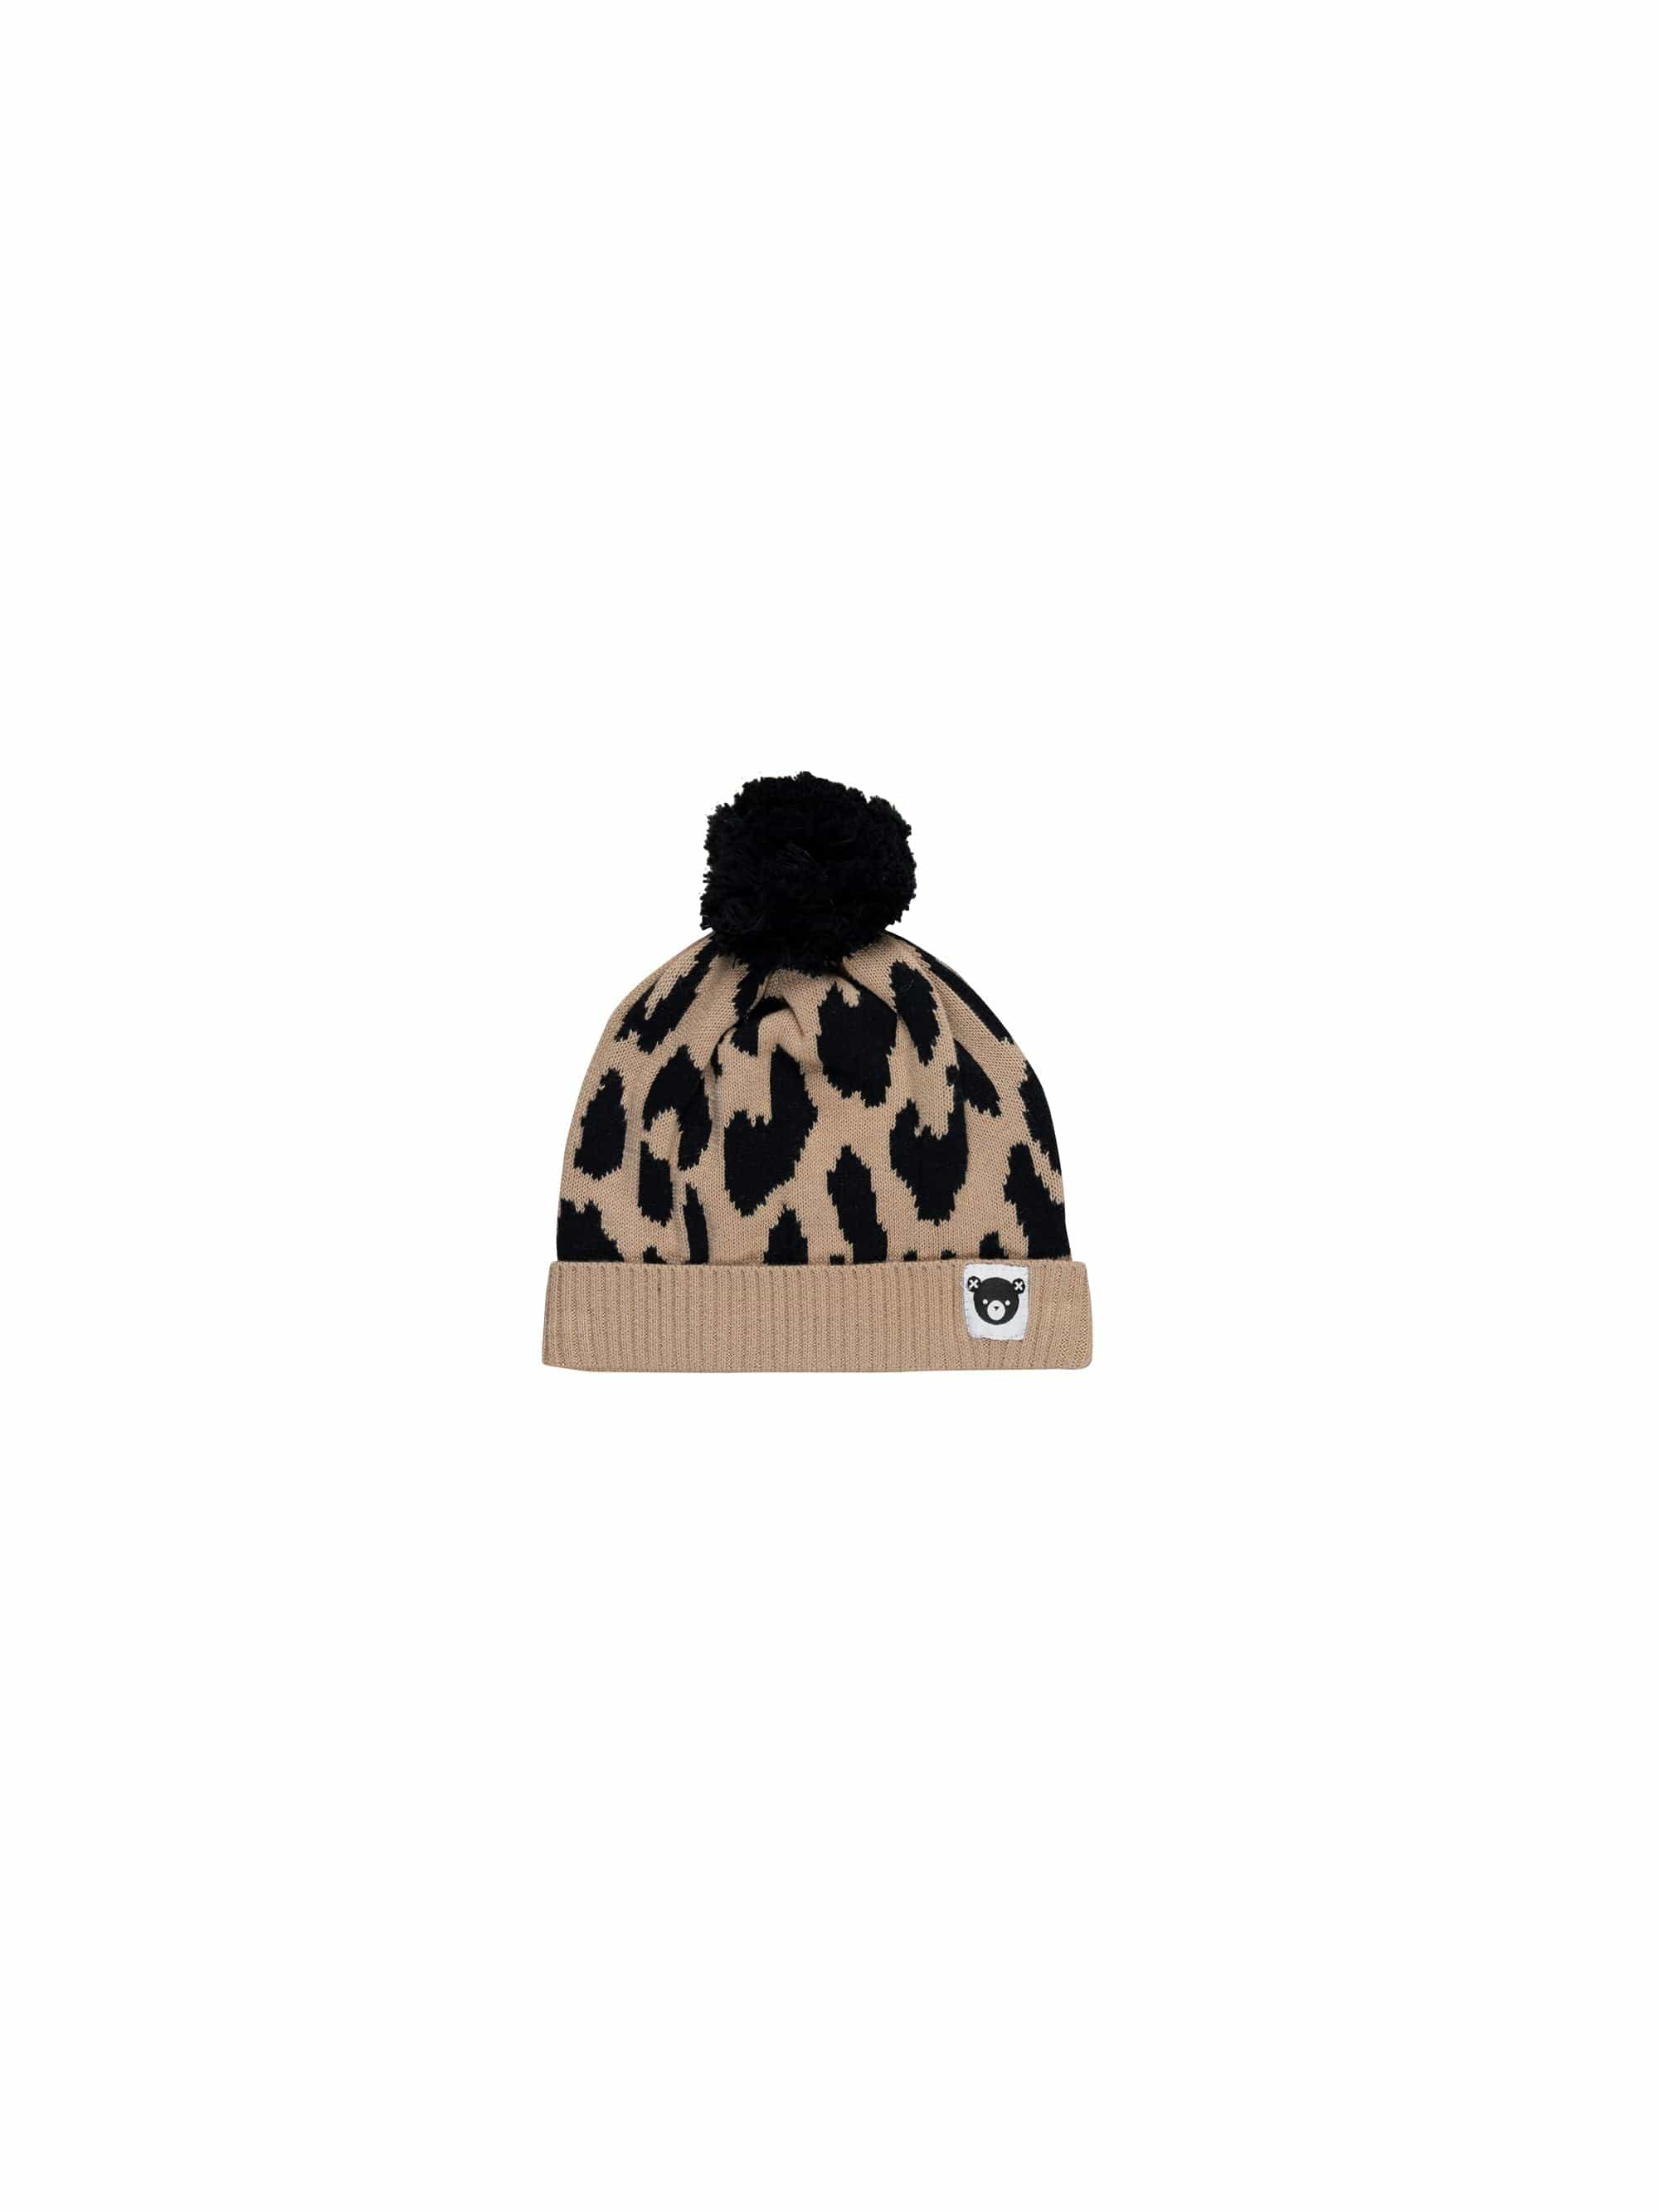 Huxbaby Accessories Hats Honeycomb Leopard Knit Beanie